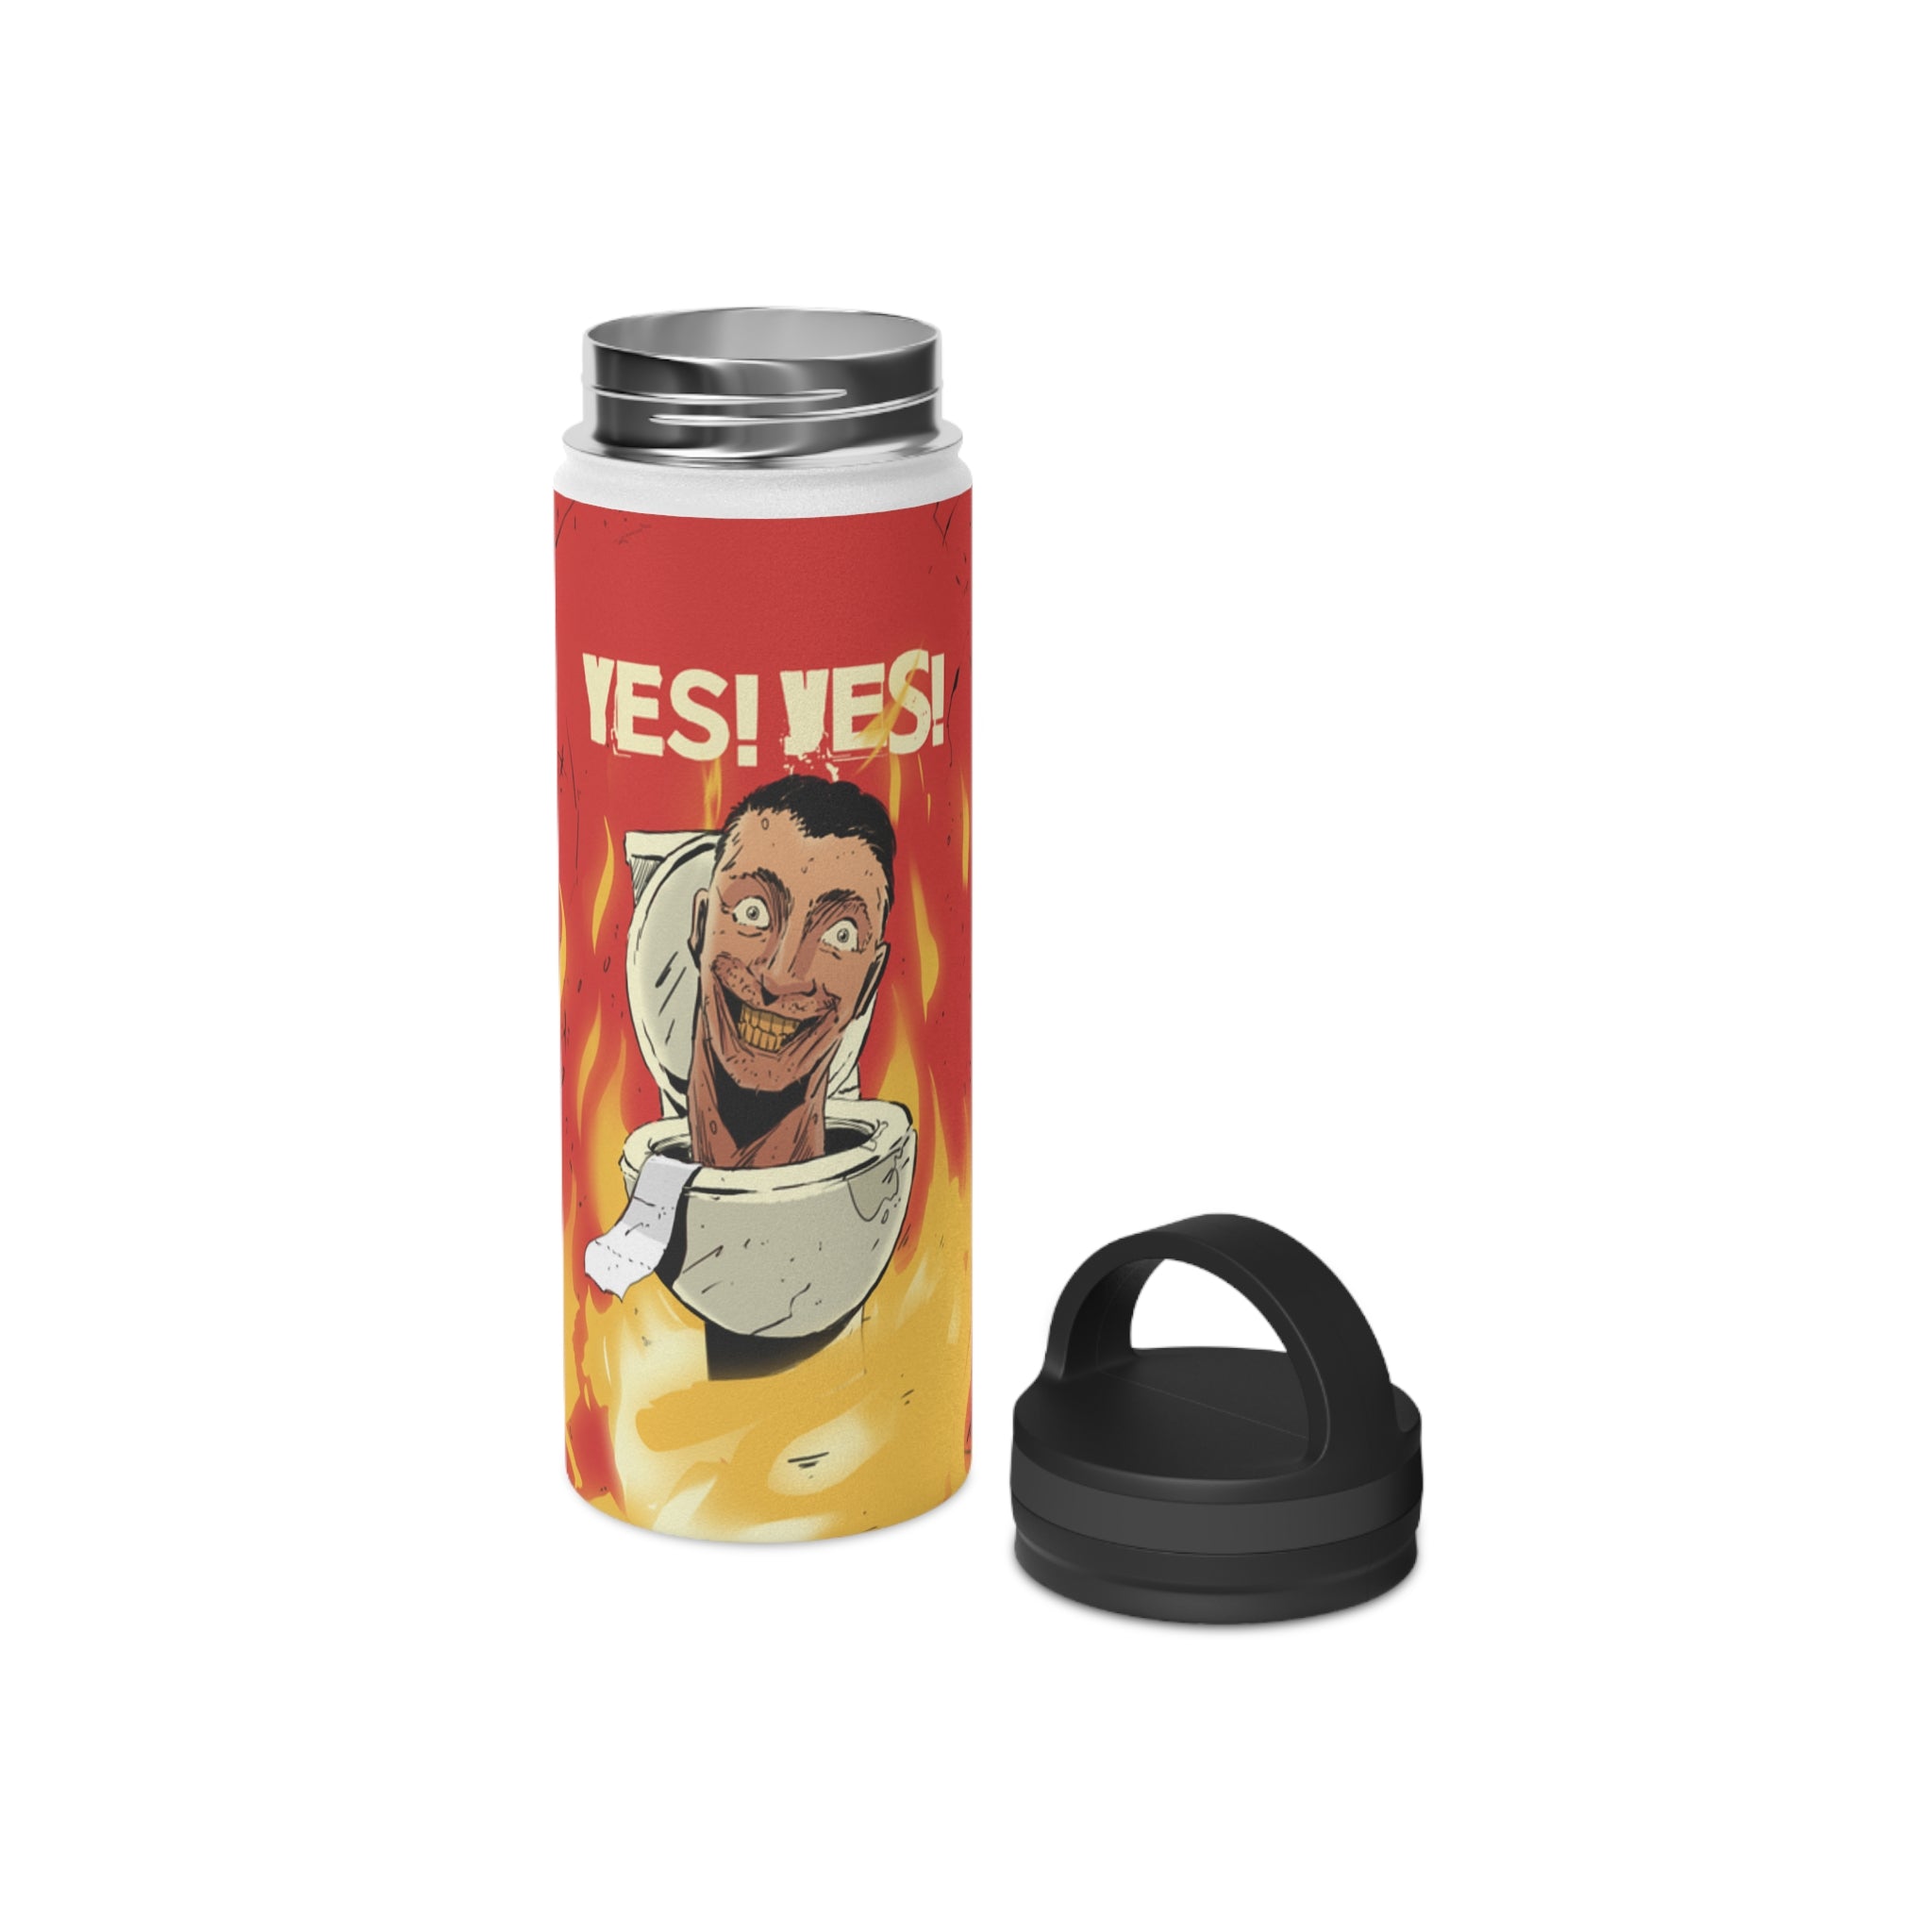 Yes! Yes! Water Bottle Stainless steel water bottle with Skibidi toilet against flames on background with bottle lid off 